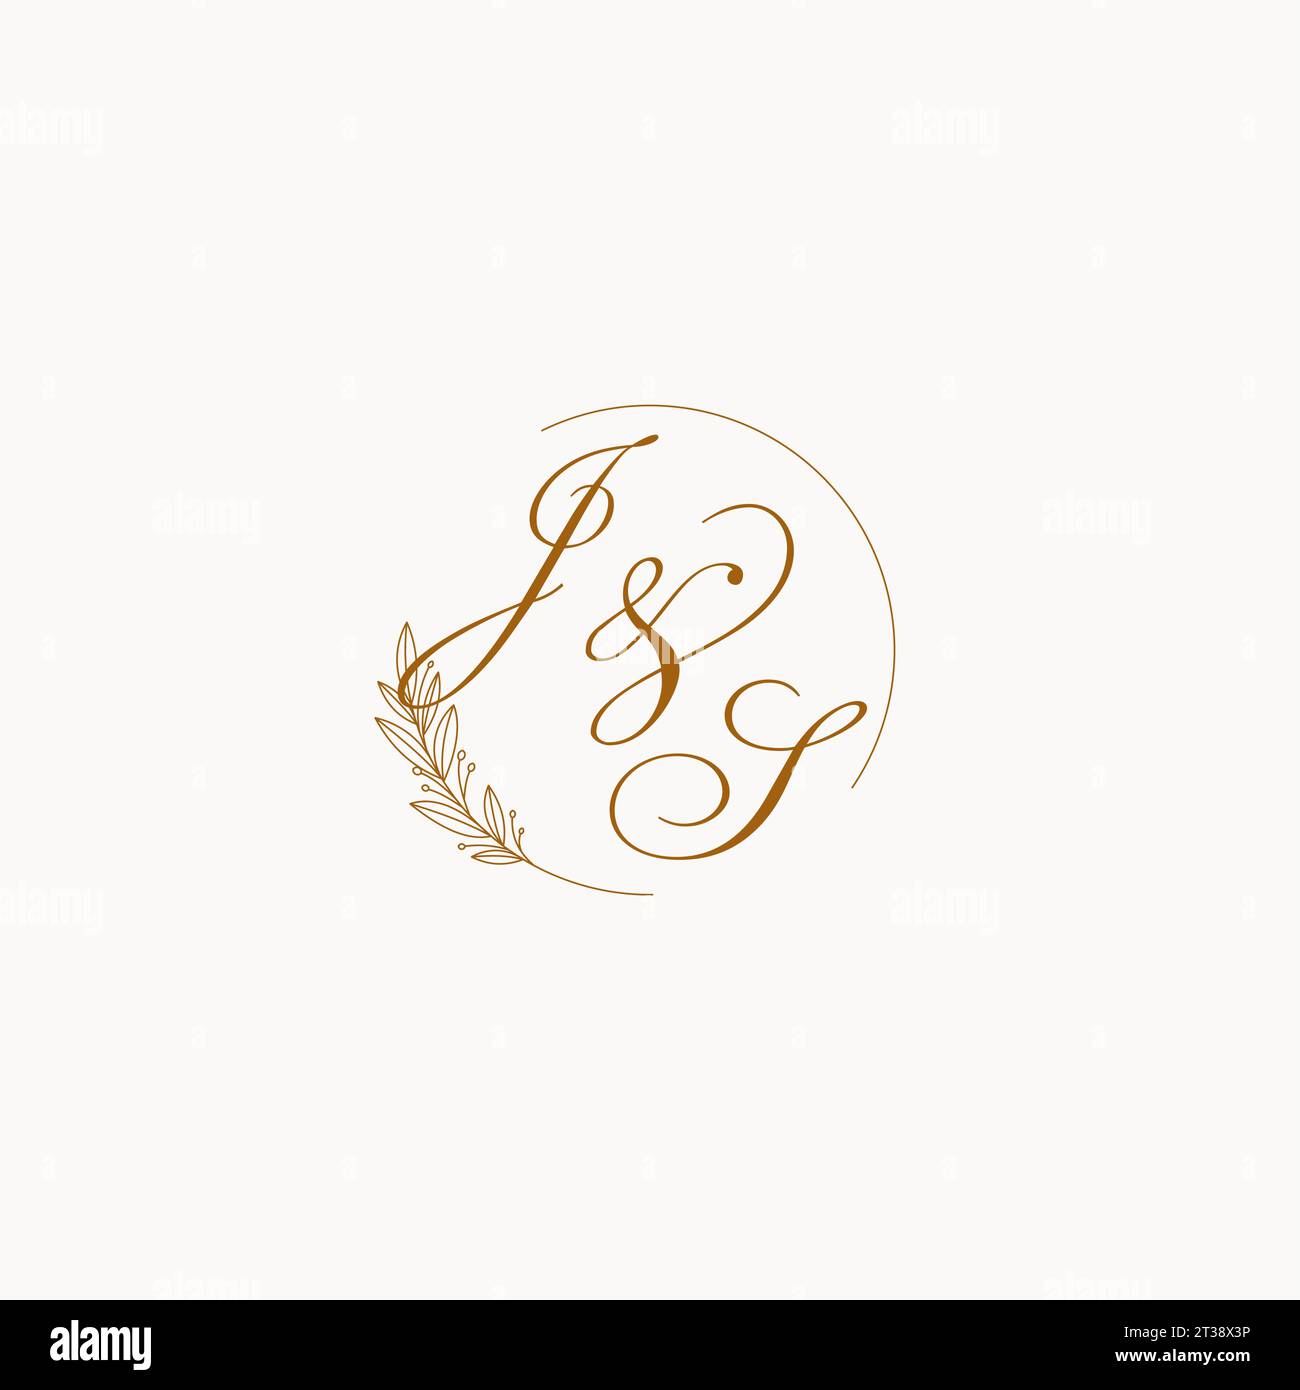 Initials JS wedding monogram logo with leaves and elegant circular lines vector graphic Stock Vector